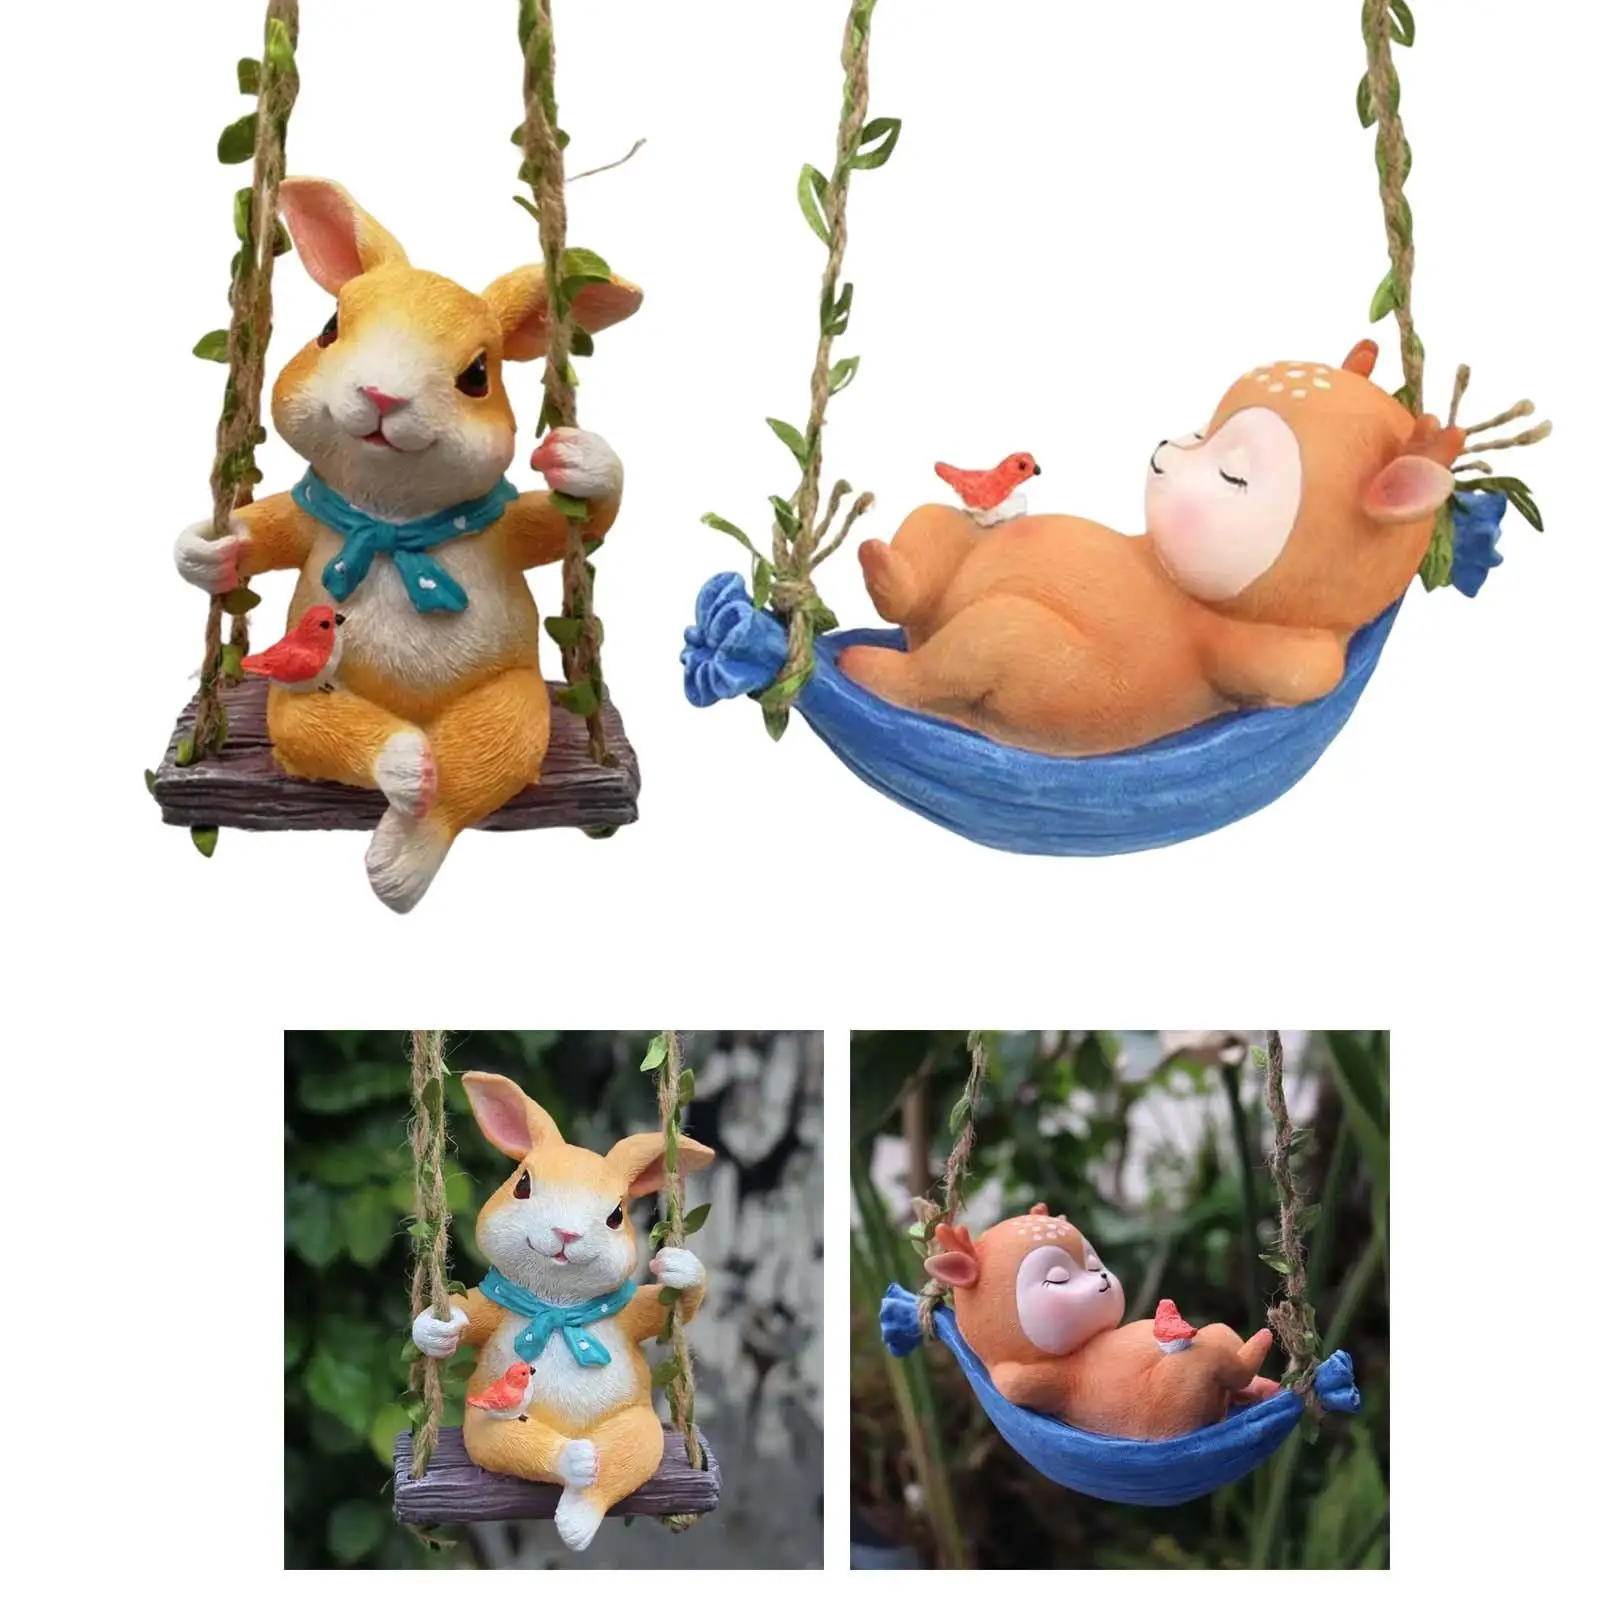 Cute Swing On Animal Statue Outdoor Animal Sculpture Ornaments Hanging Garden Statues for Shelf Desk Home Decor Ornament